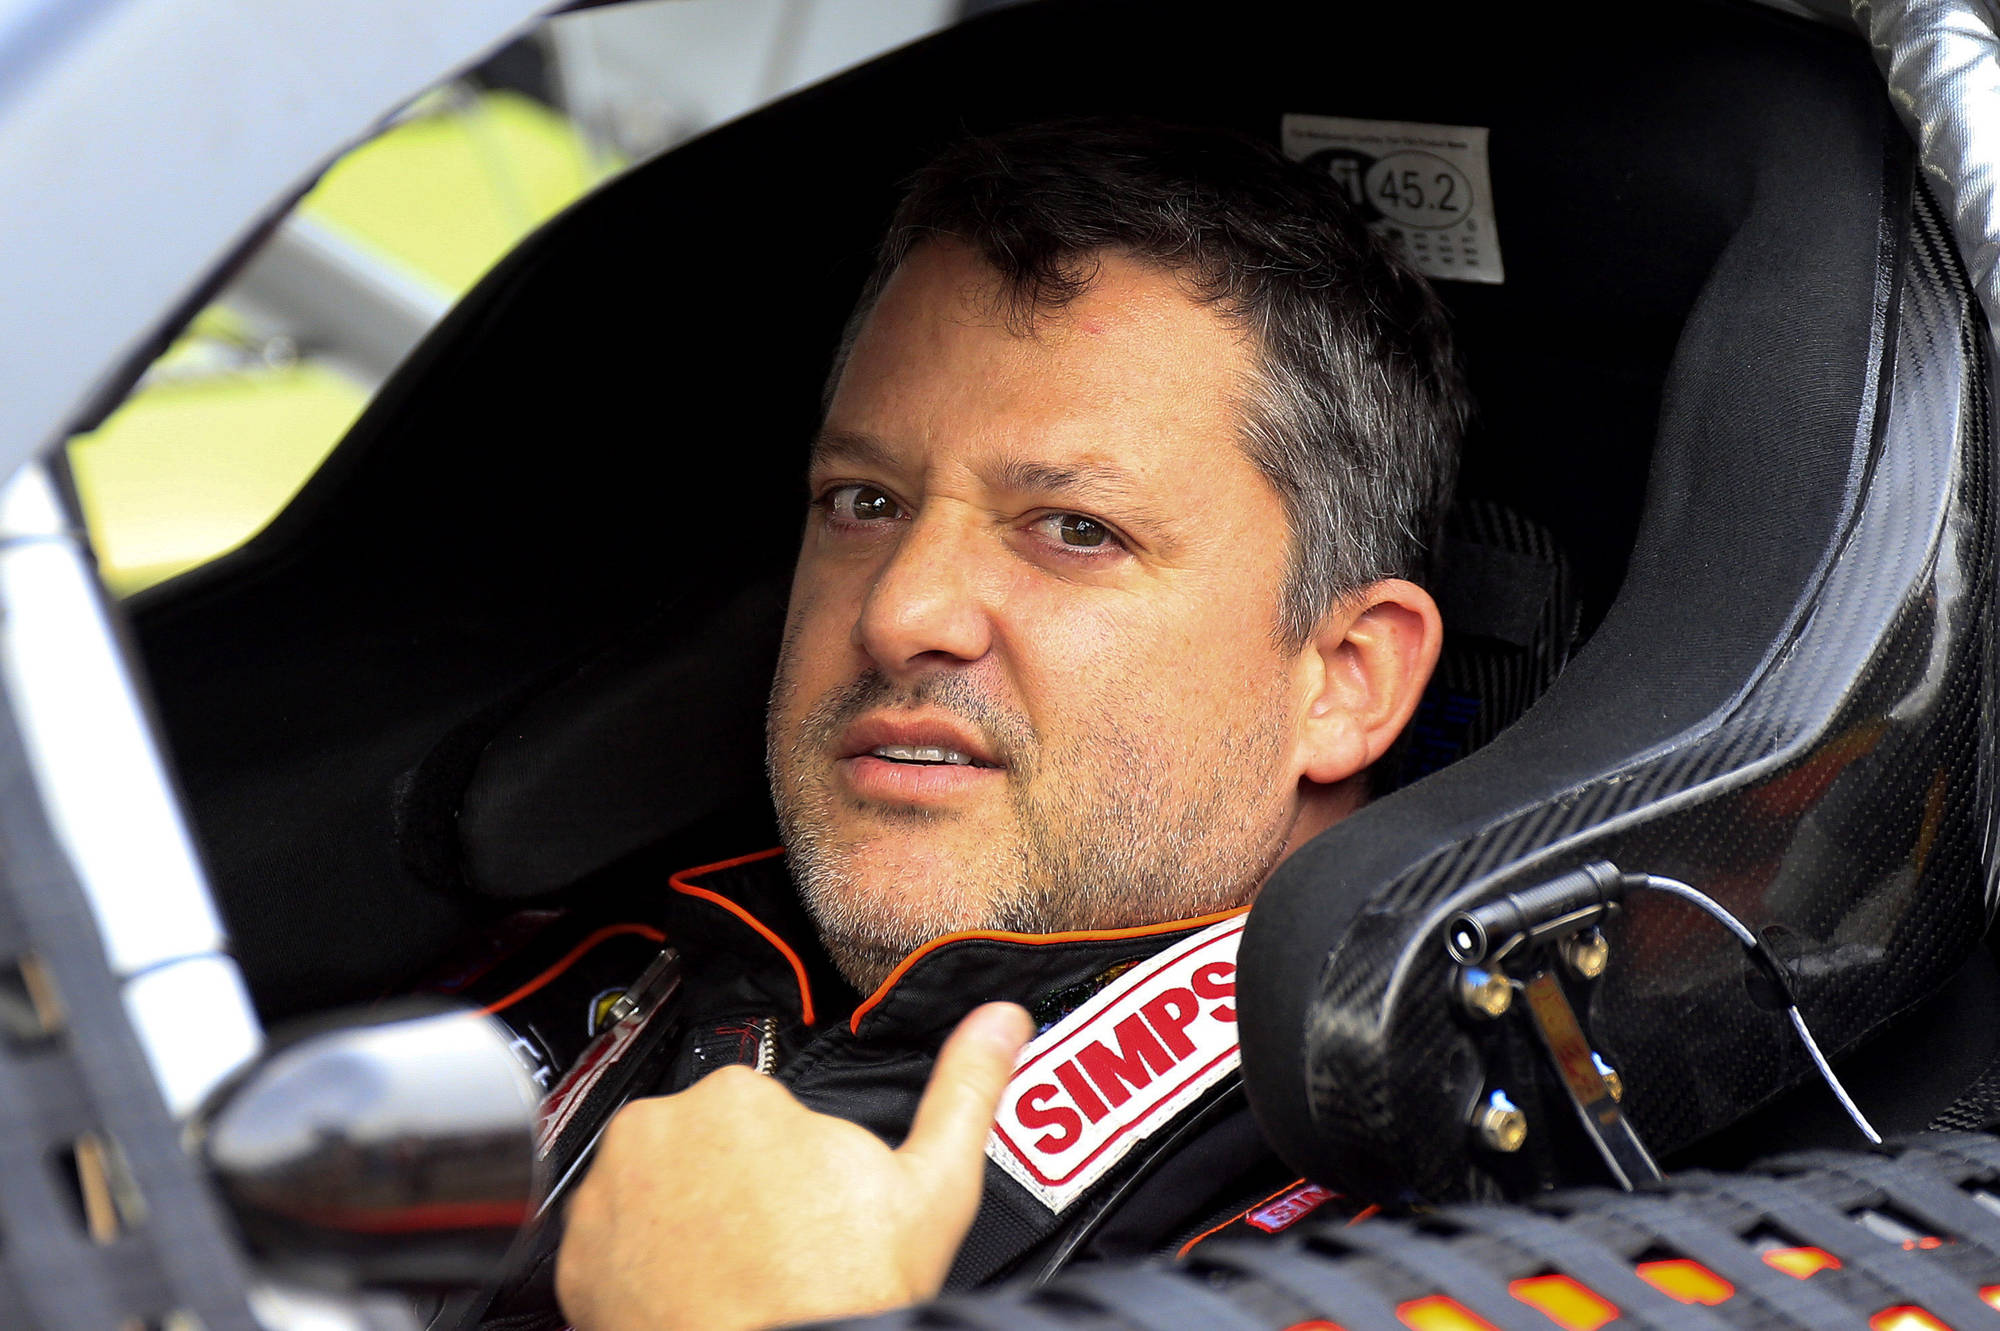 Tony Stewart Suffers Back Injury In ATV Accident on West Coast